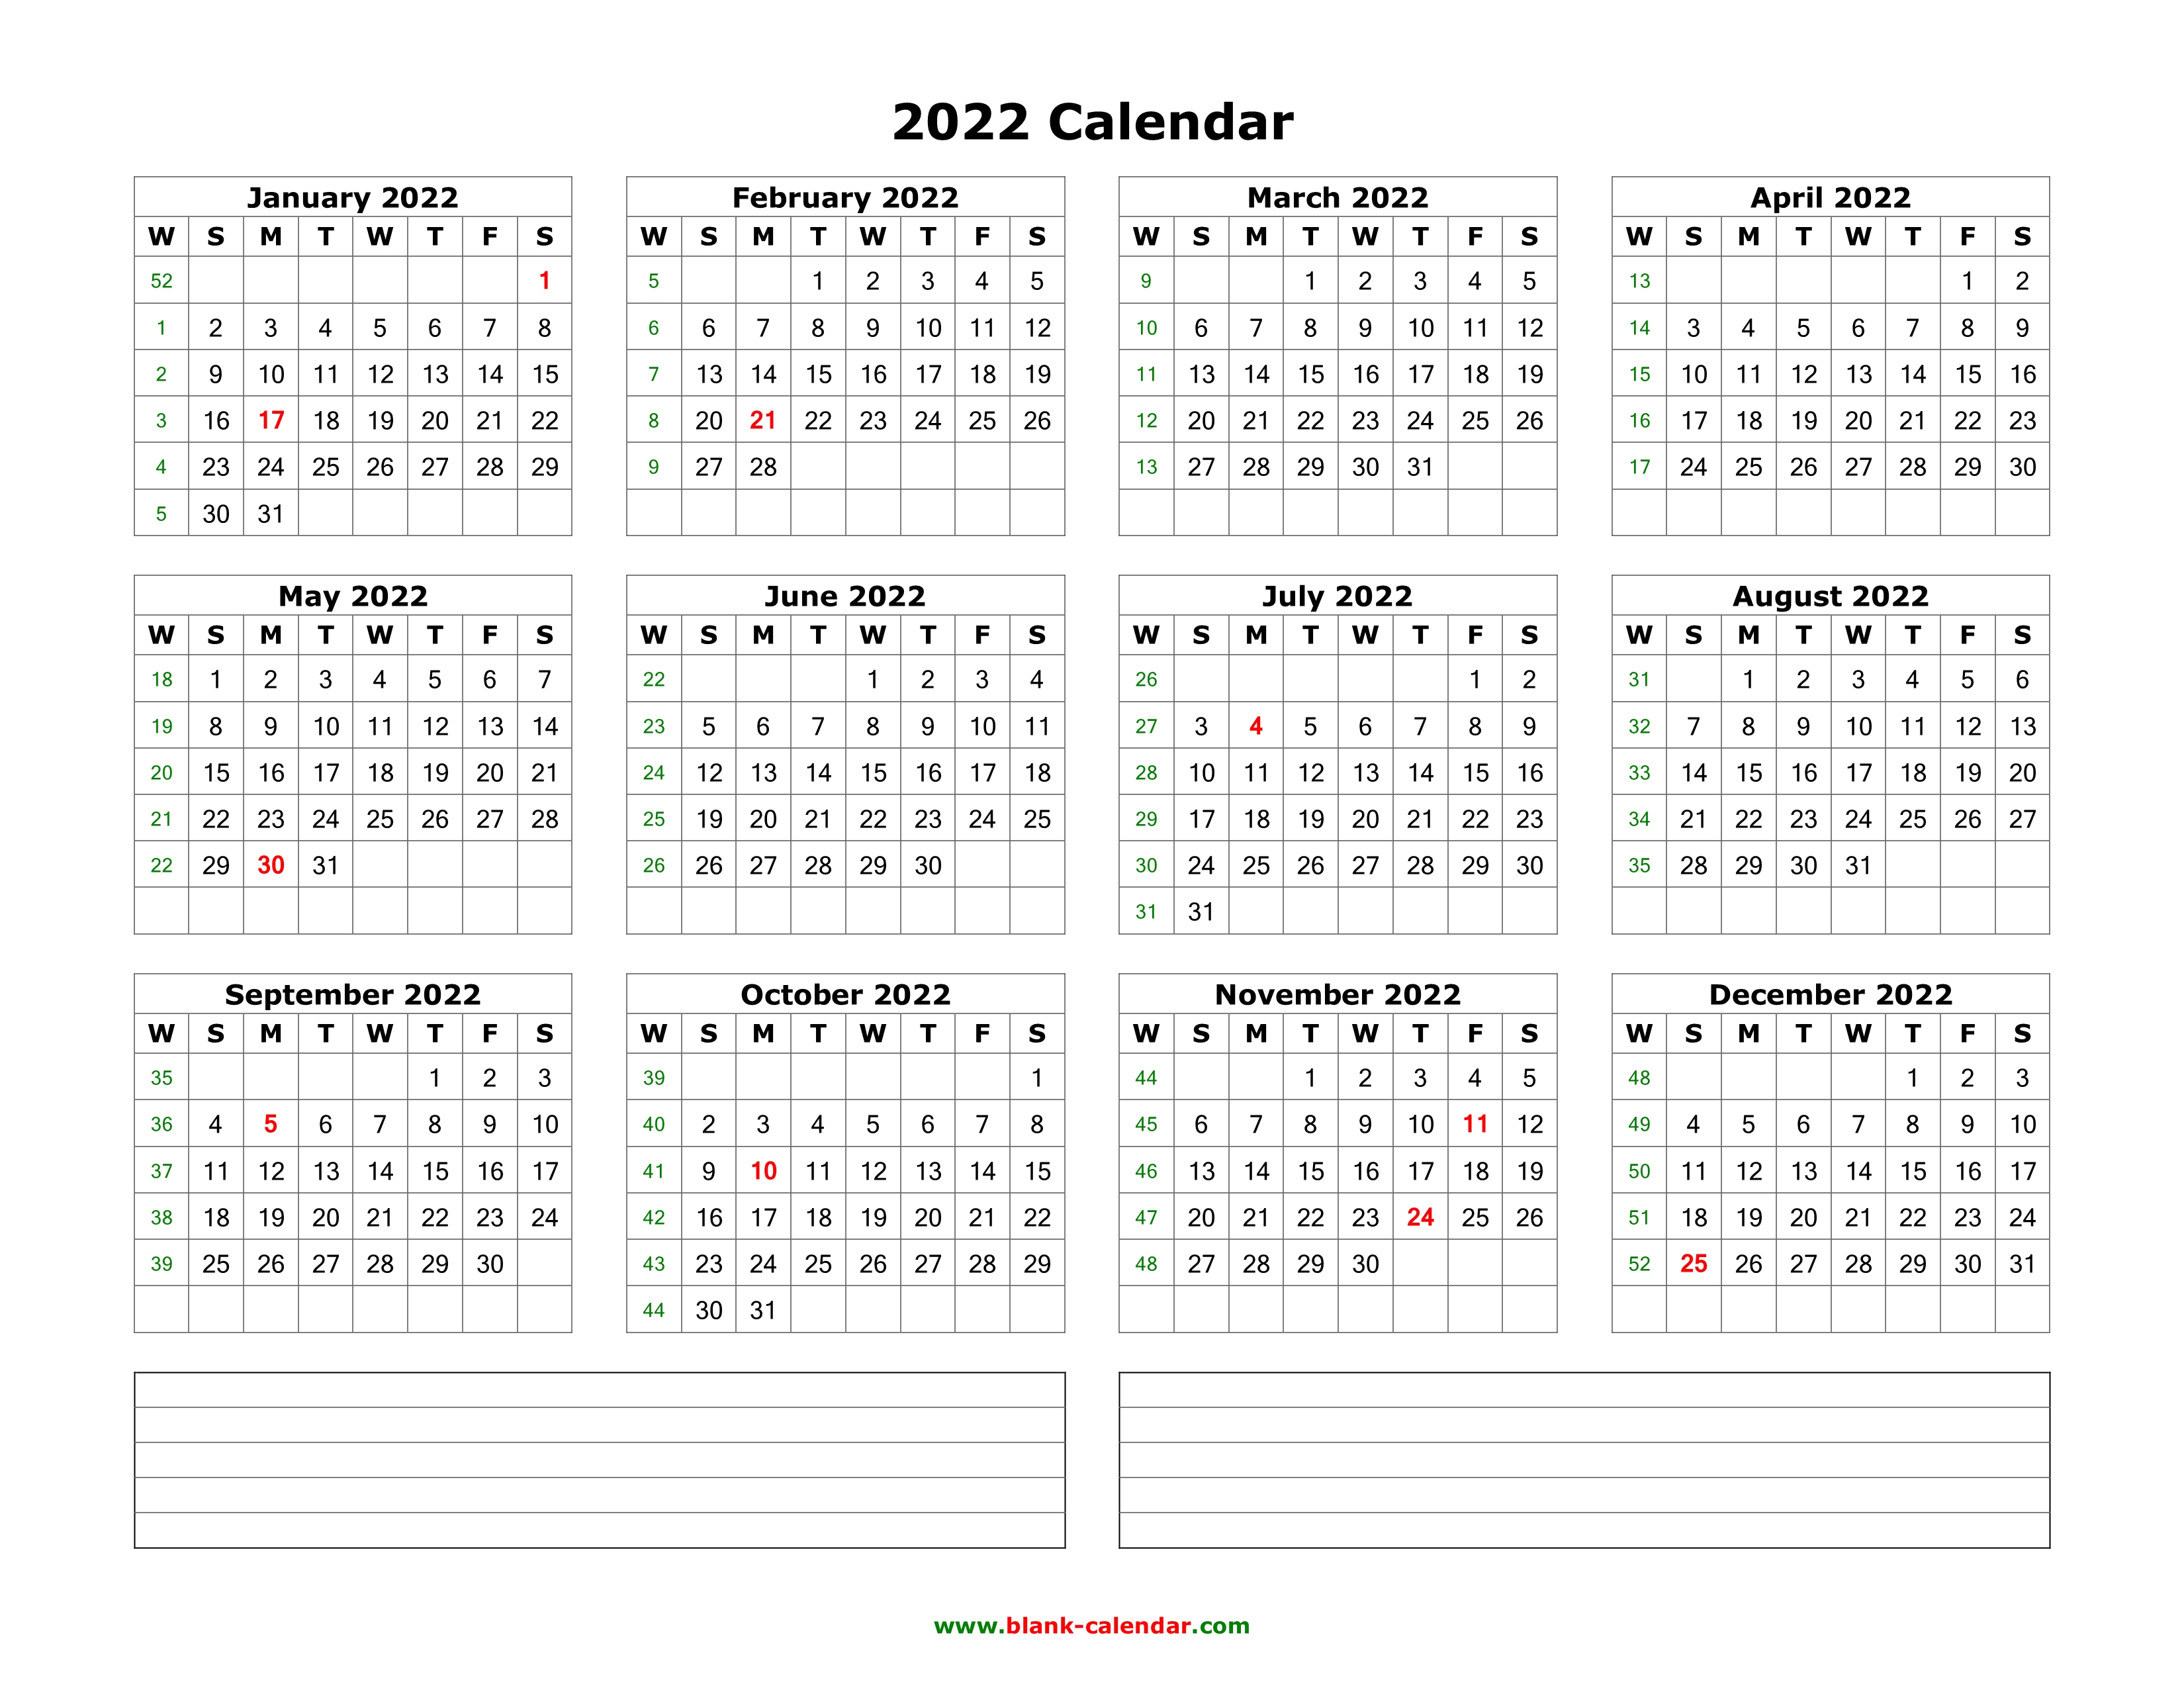 Download Blank Calendar 2022 With Space For Notes 12 Months On One Page Horizontal